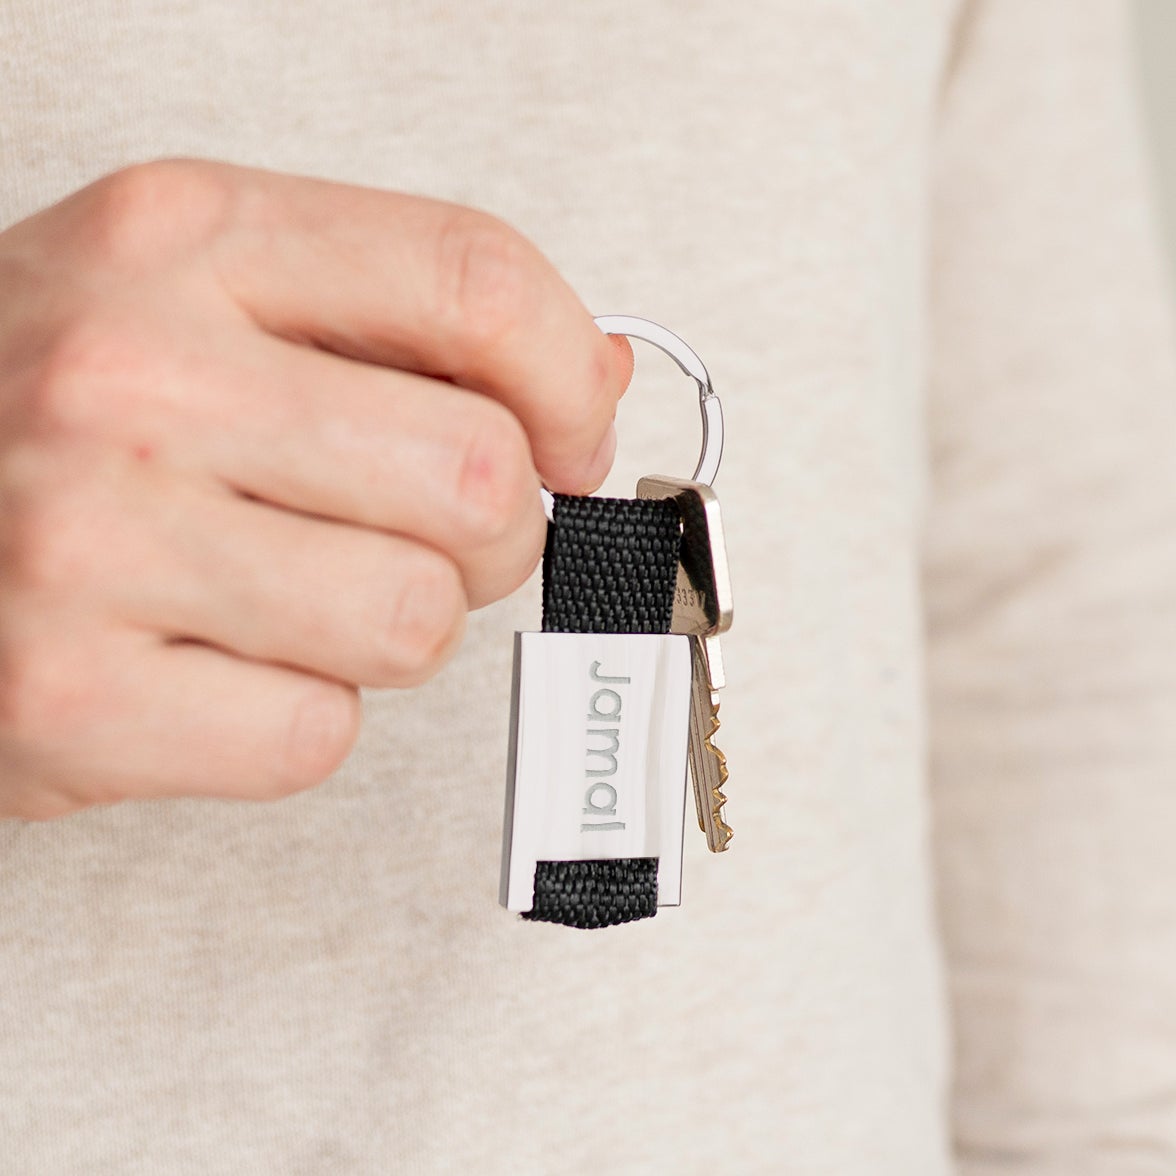 Personalised key ring - Deluxe - Rectangle - Name/Text - Engraved